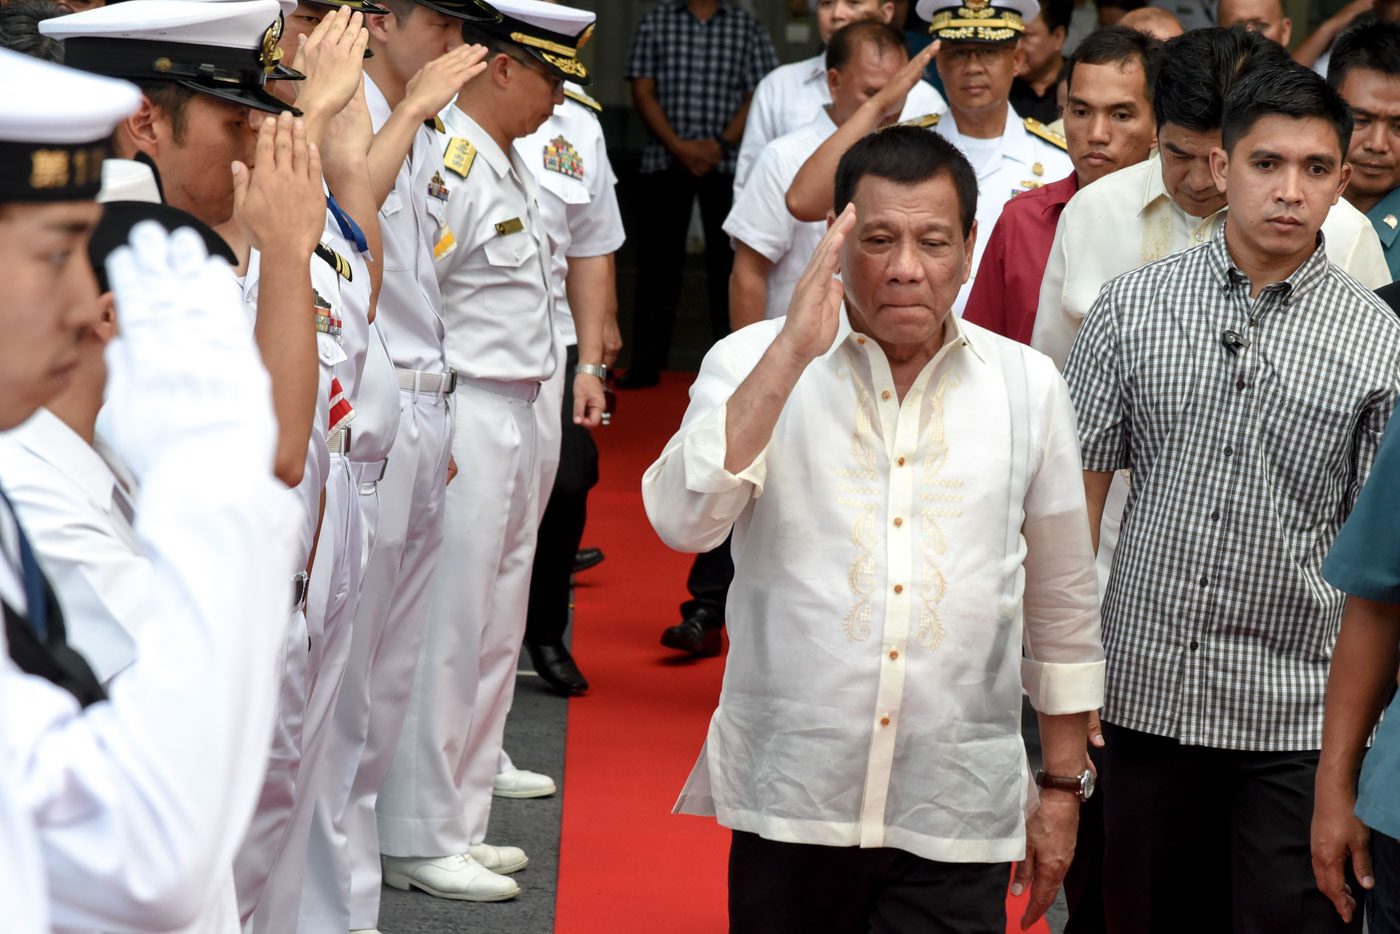 The good and the bad: Analysts assess #DuterteYear1